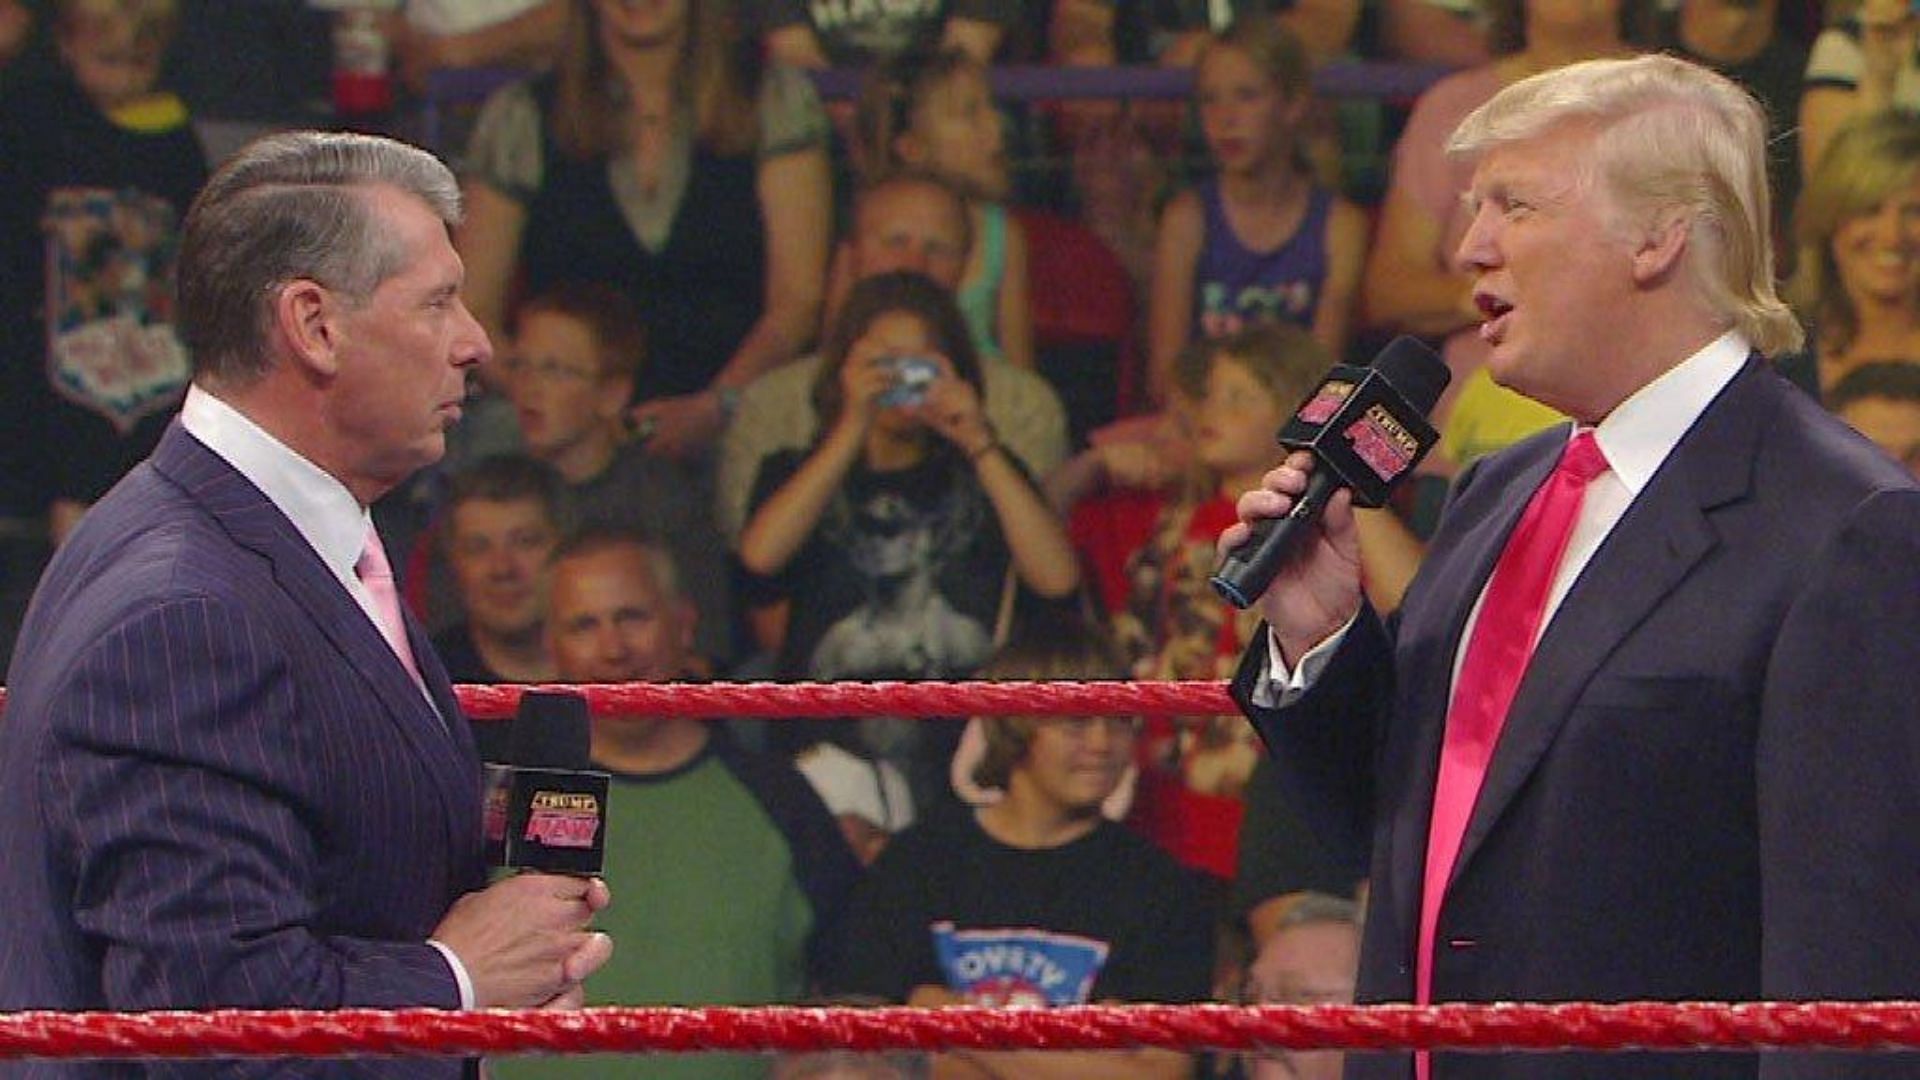 Donal Trump had a rivalry with Vince McMahon